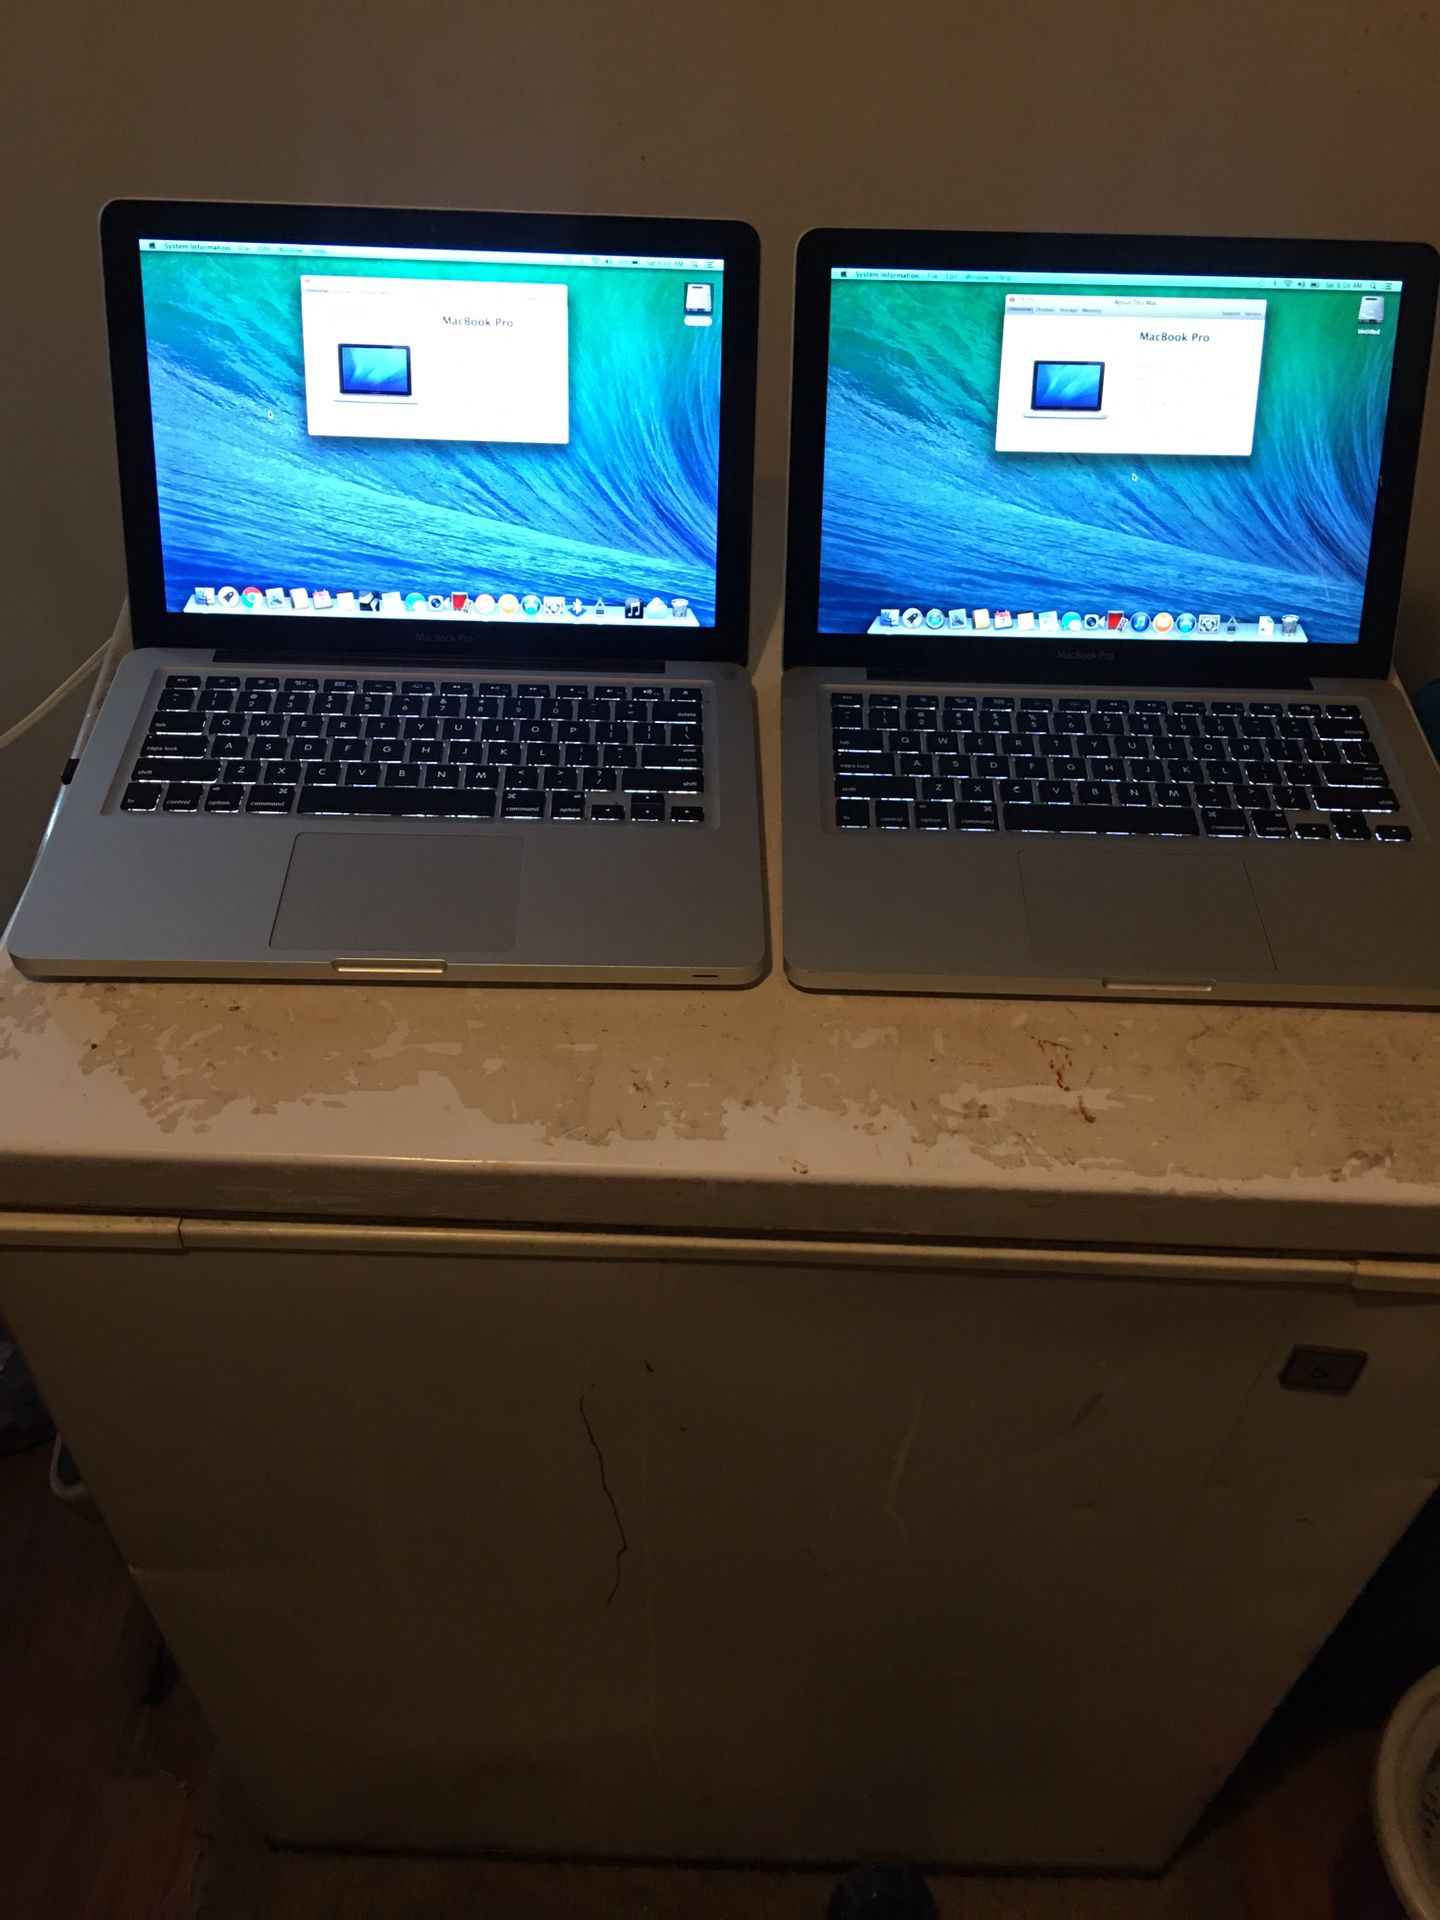 2 UNLOCKED Mid 2012 13 inch MacBook Pro i5/4gb/500gb with Final Cut Pro X, Studio One And More